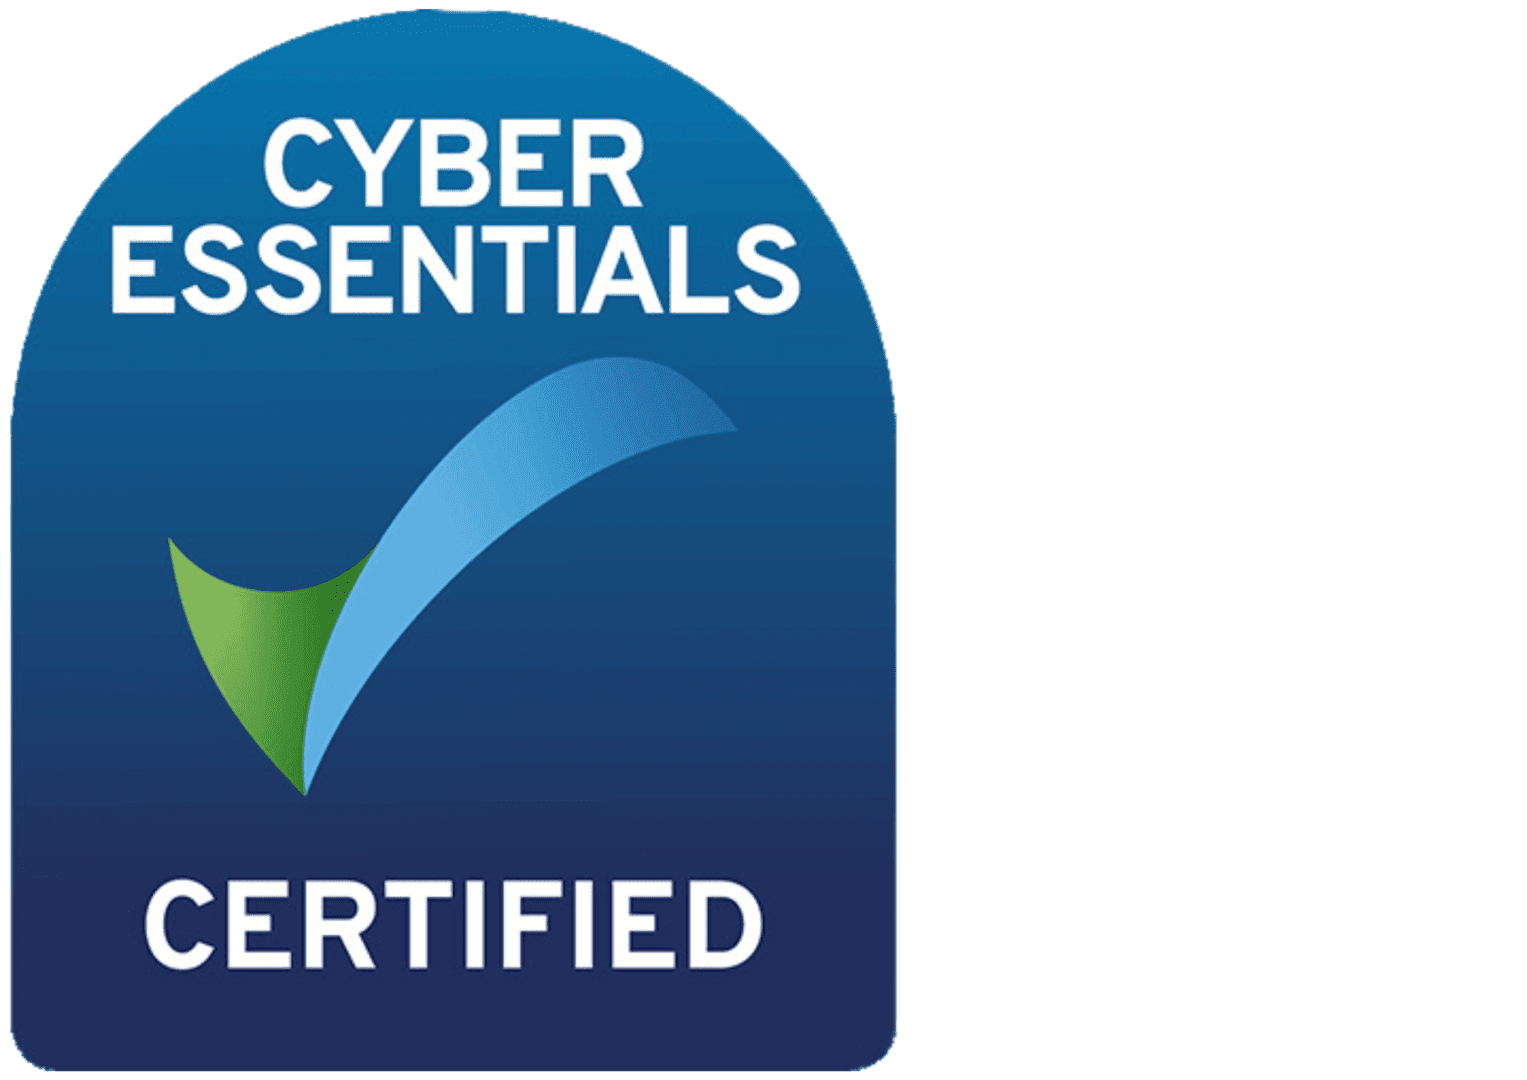 A blue and green logo for the cyber essentials certified.